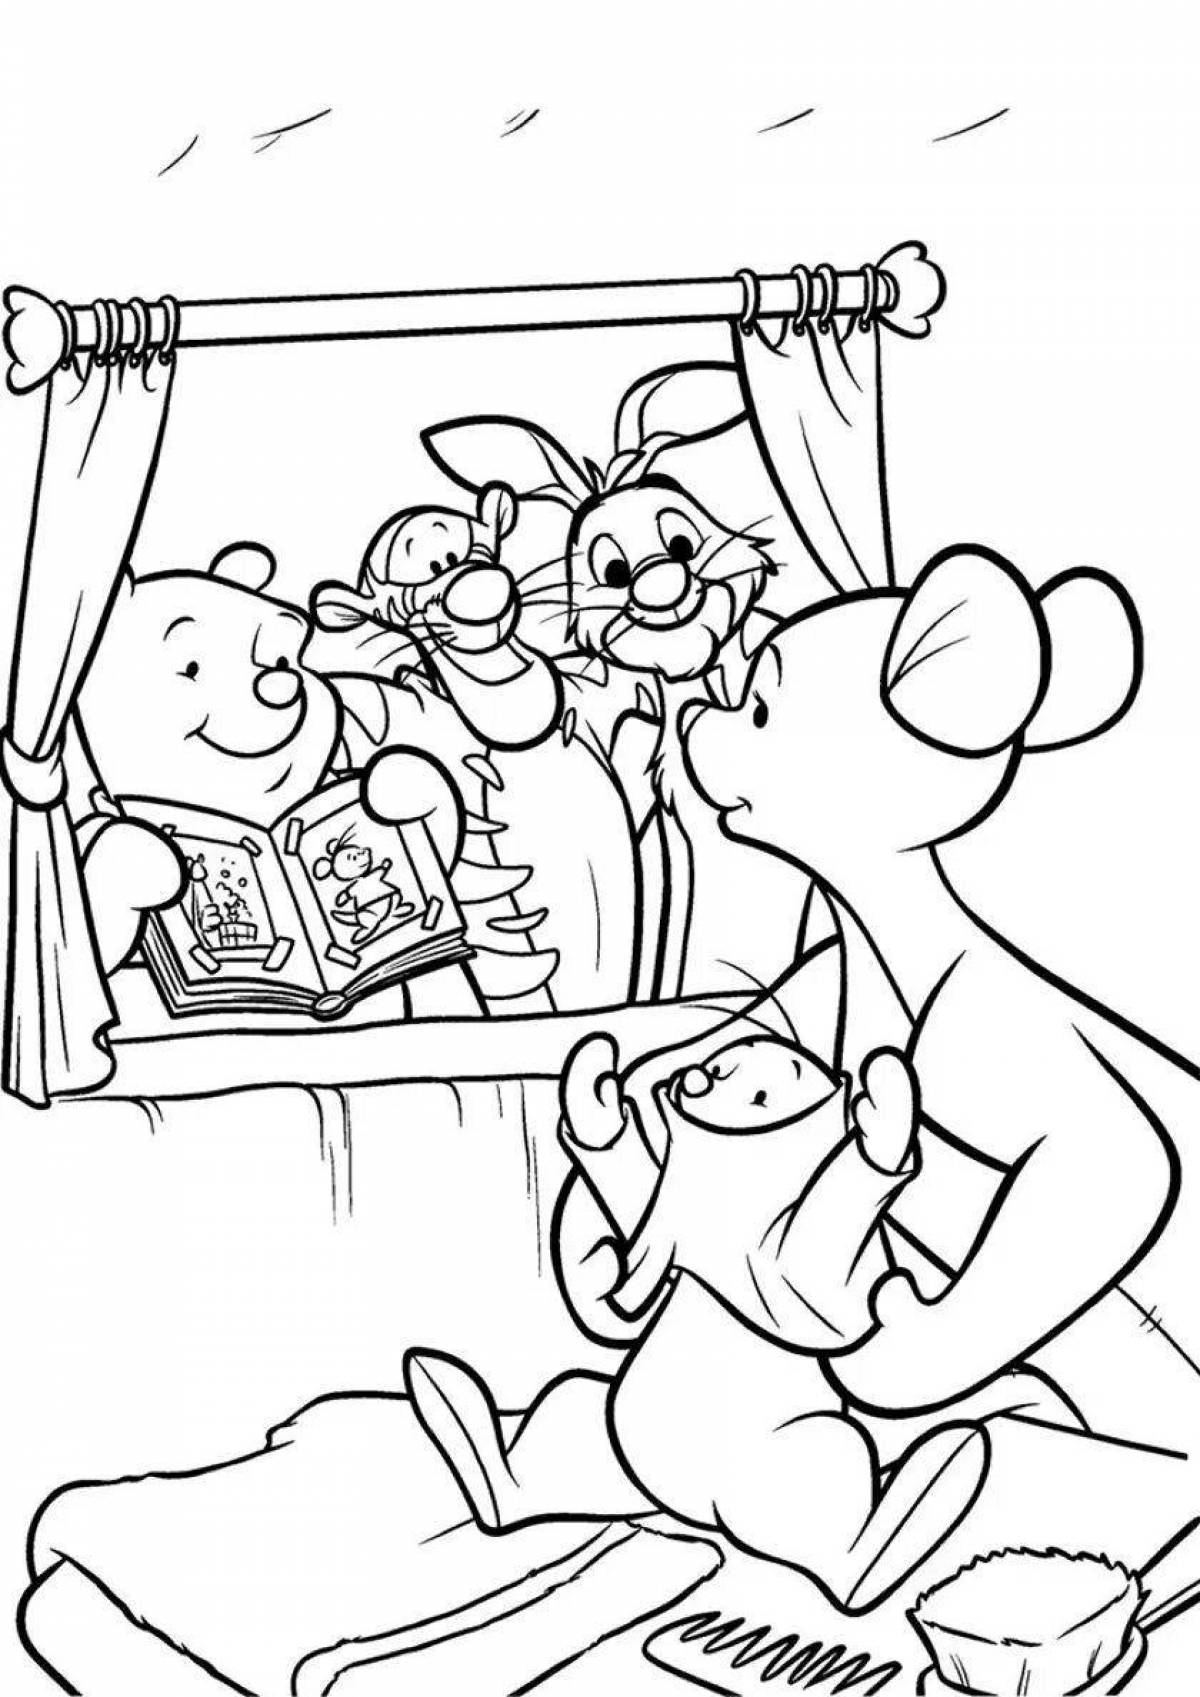 Inviting coloring pages ru official website